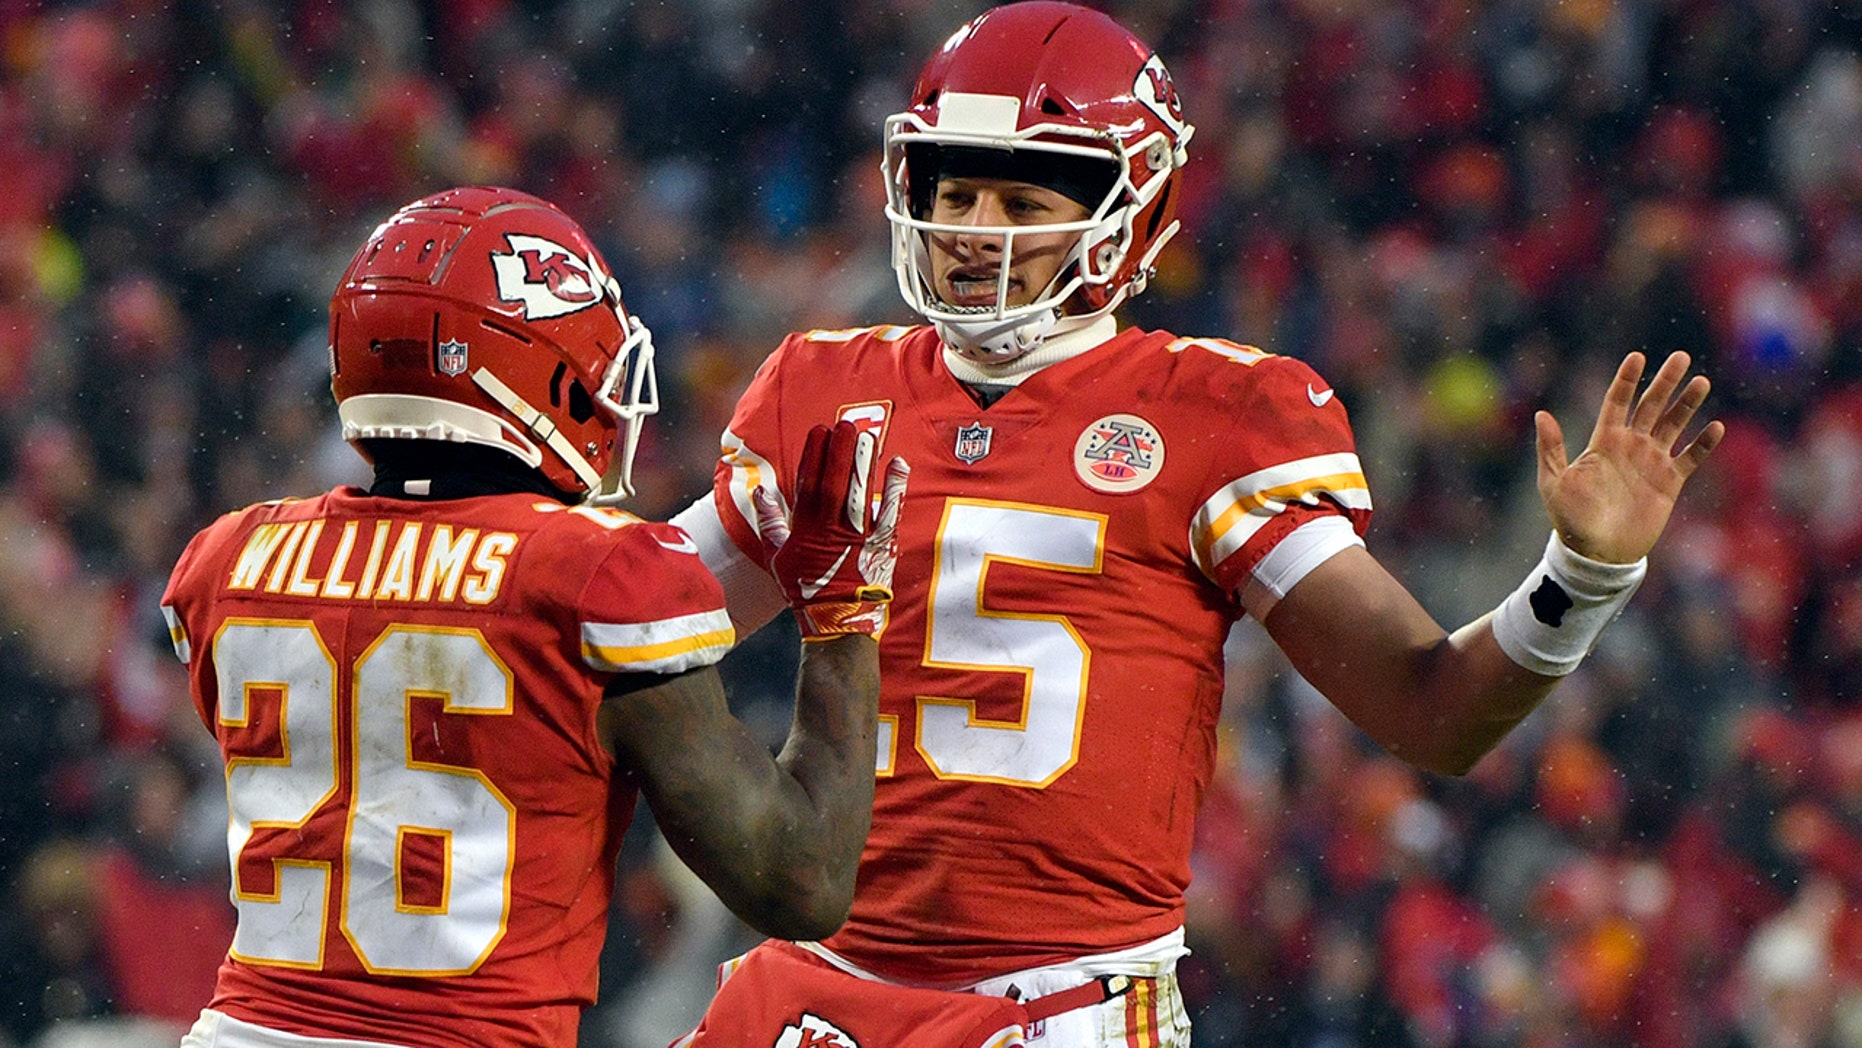 Chiefs roll past Colts 31-13 to reach AFC title game | Fox News